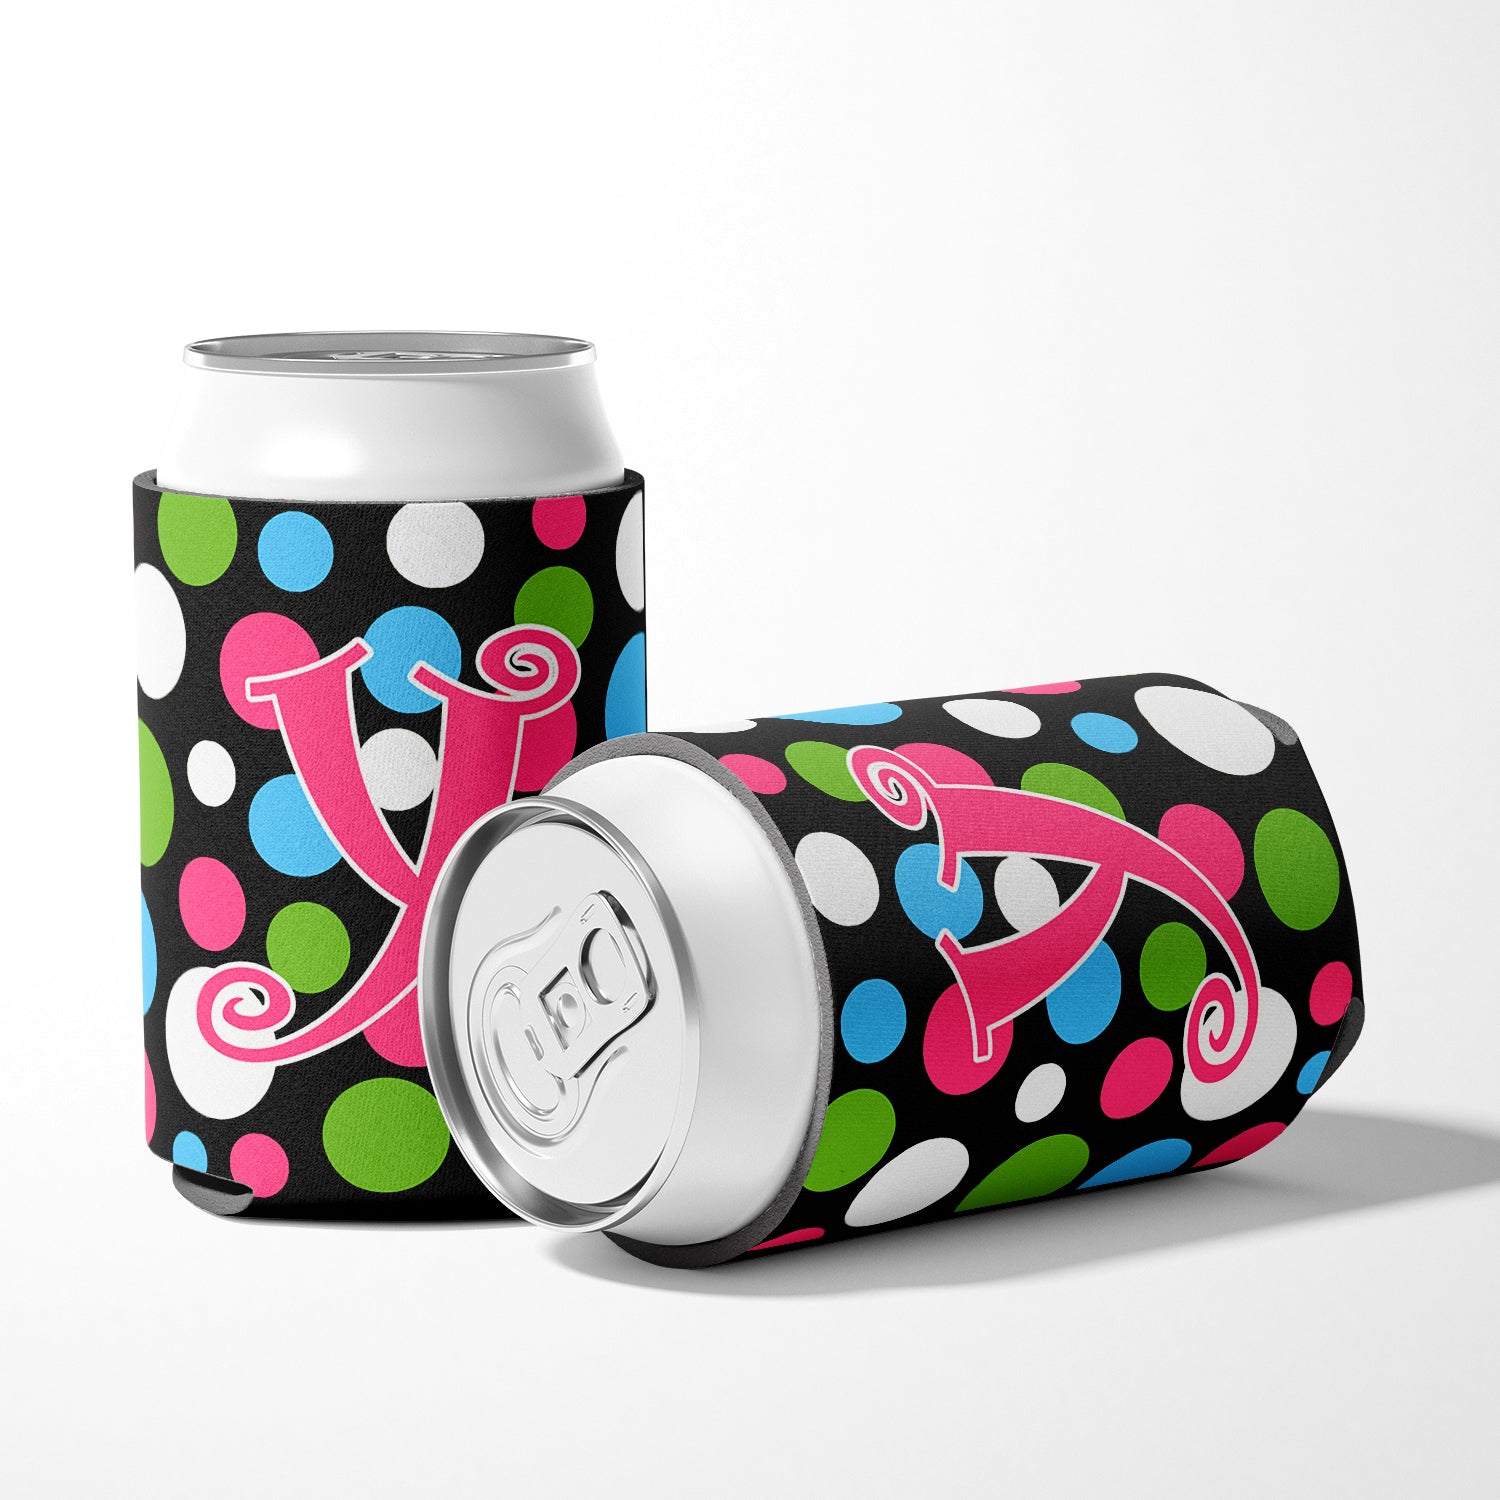 Letter Y Initial Monogram - Polkadots and Pink Can or Bottle Beverage Insulator Hugger.